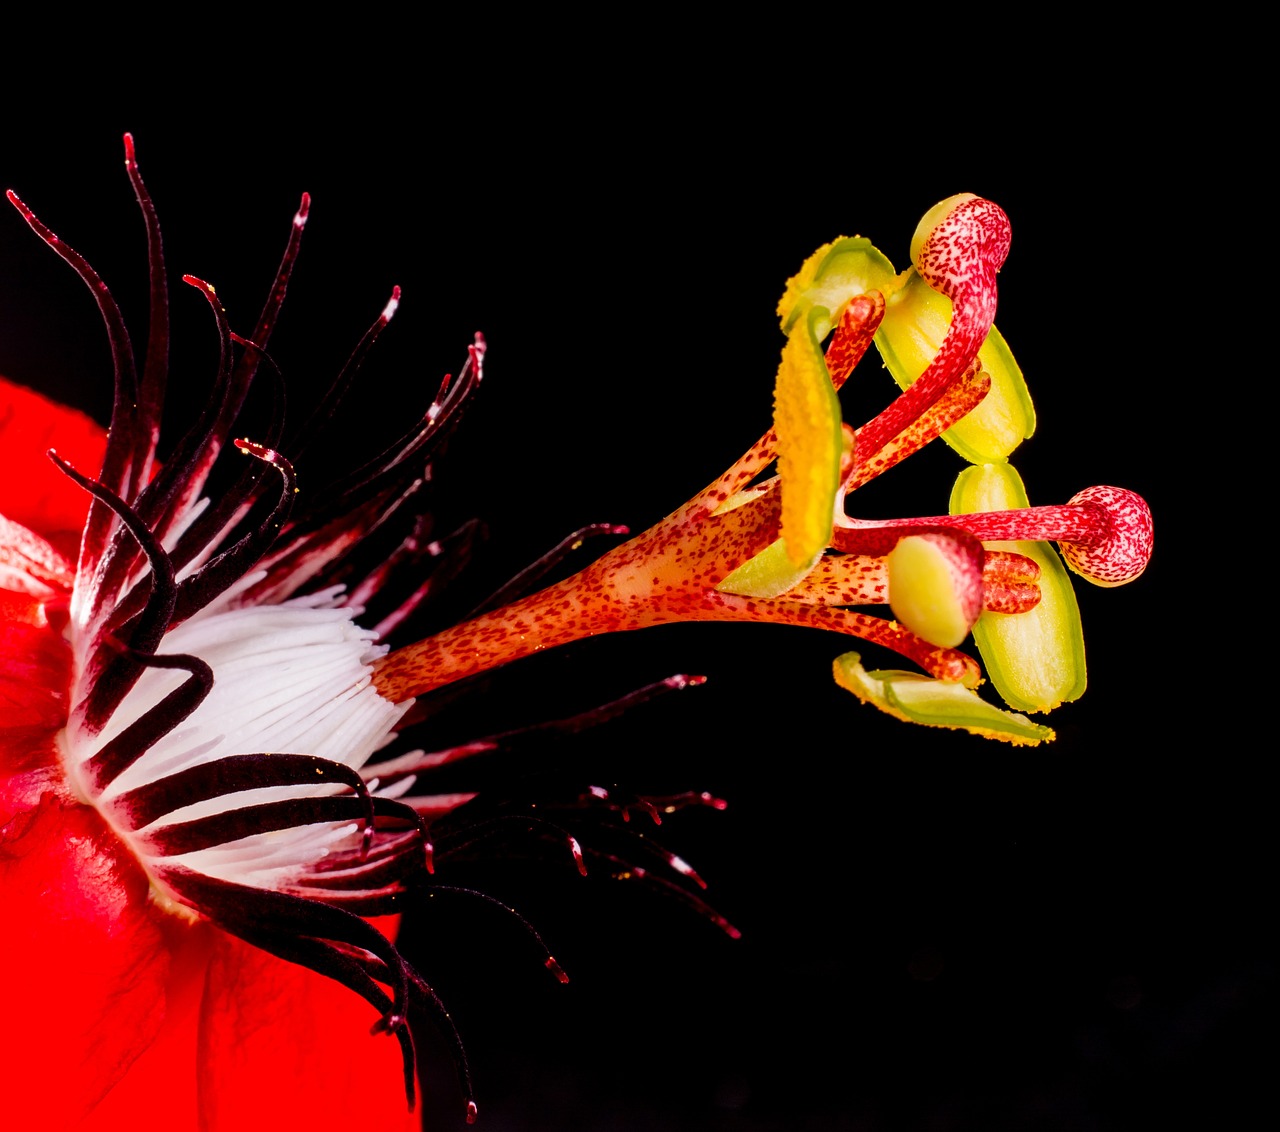 a close up of a red flower on a black background, a macro photograph, art photography, passion flower, miniature product photo, closeup photo, high resolution macro photo